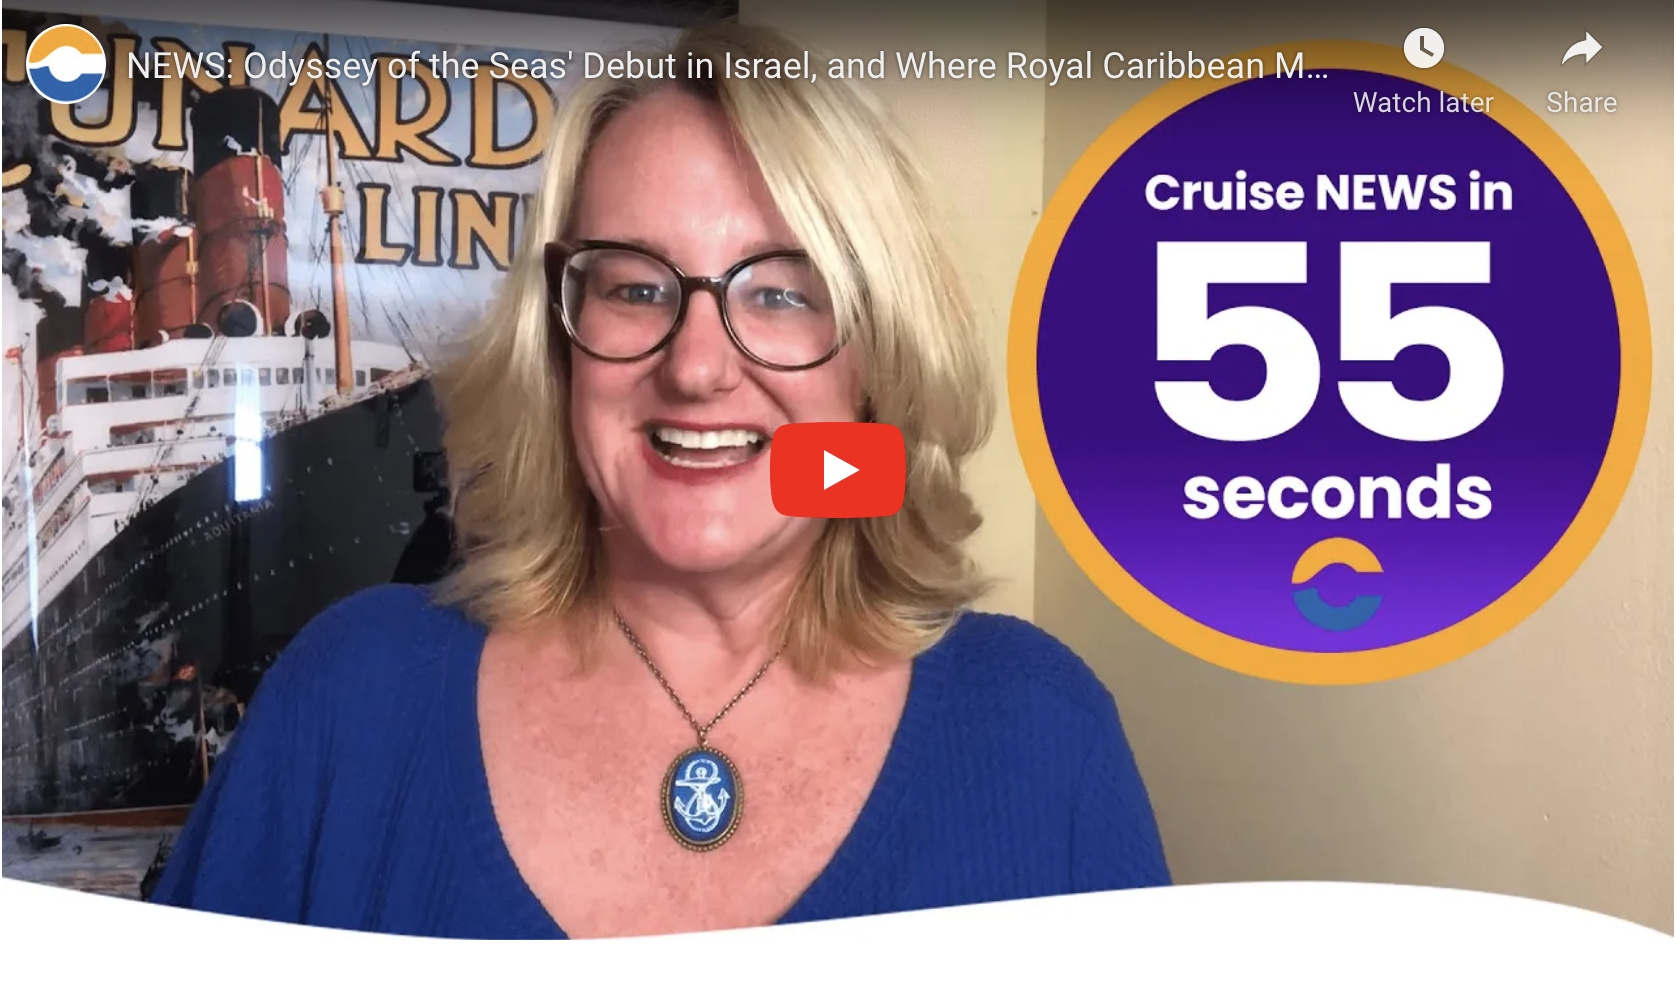 NEW VIDEO: Exciting Royal Caibbean restart news